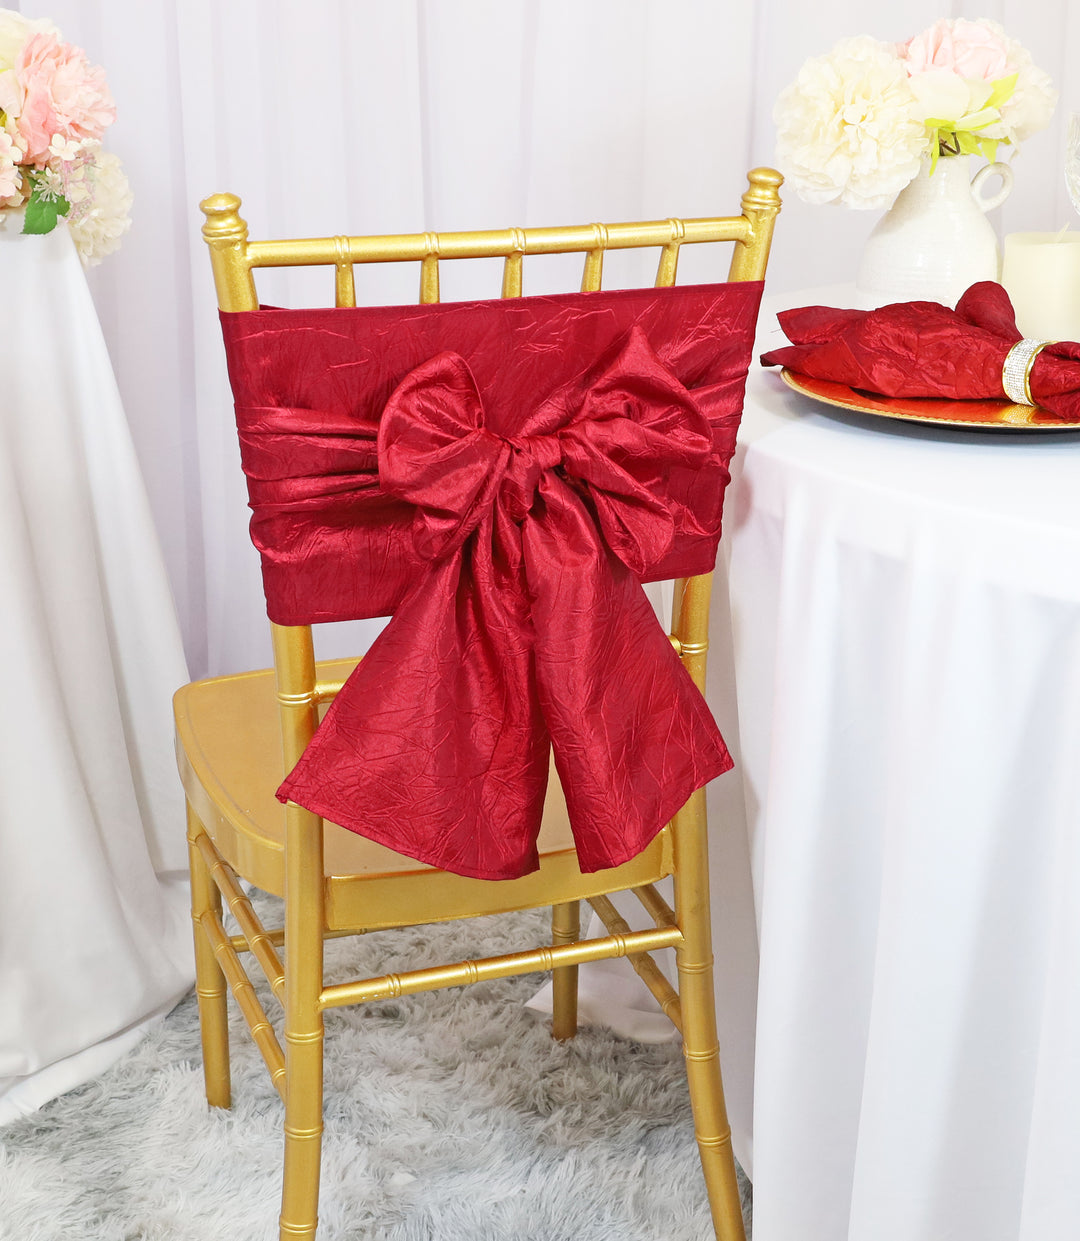 Sample 9.5"x108" Crushed Taffeta Chair Sashes - Apple Red (1pc)